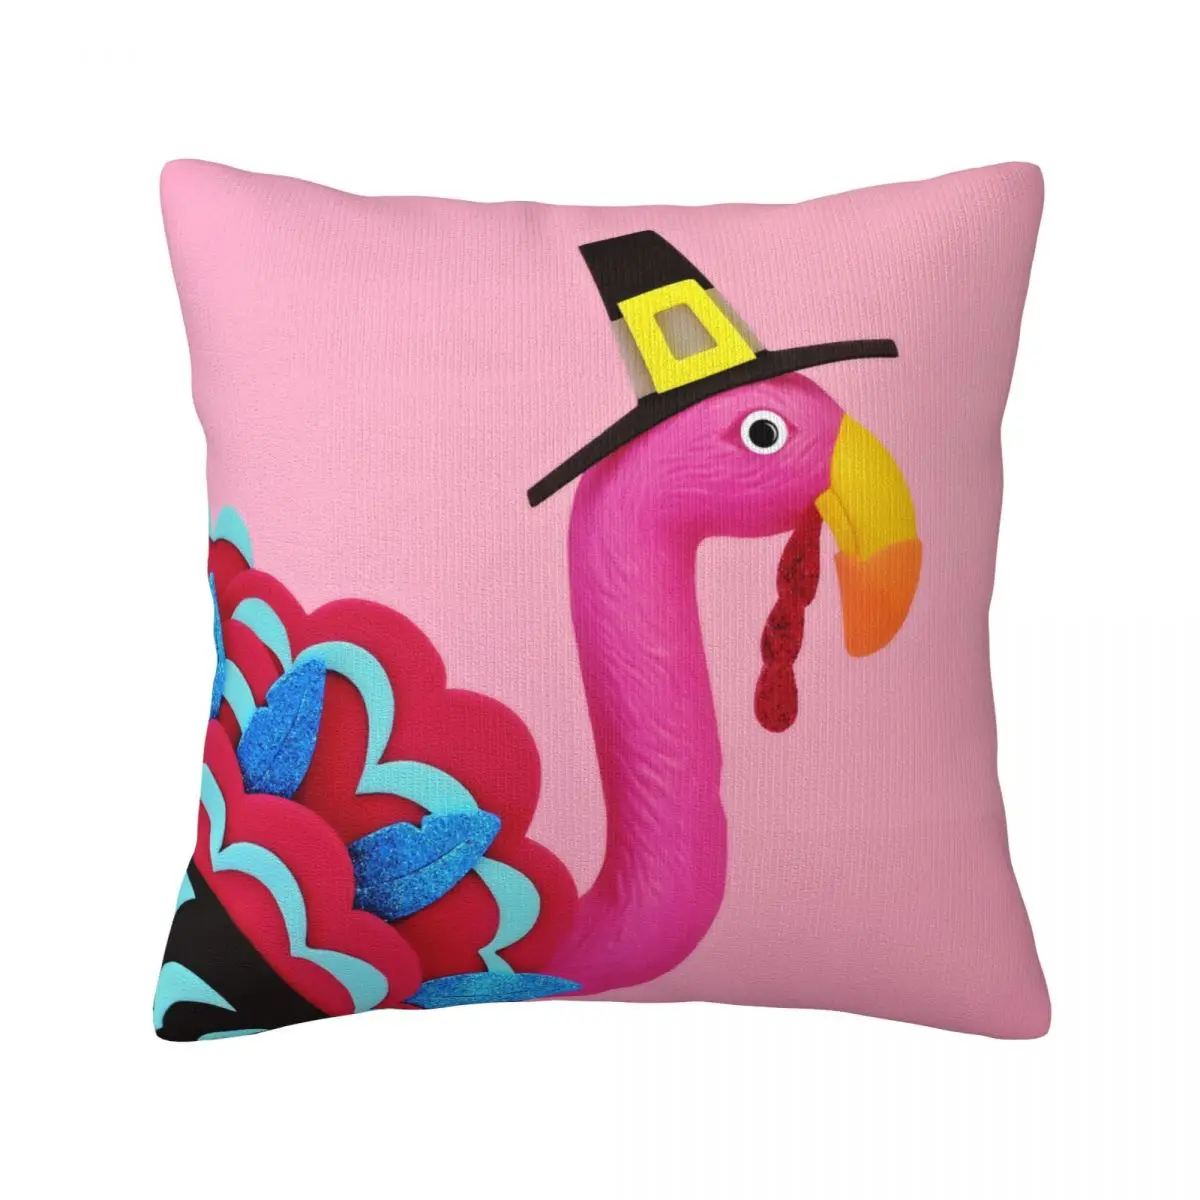 

Pink Flamingo Throw Pillow Cover Decorative Pillow Covers Home Pillows Shells Cushion Cover Zippered Pillowcase